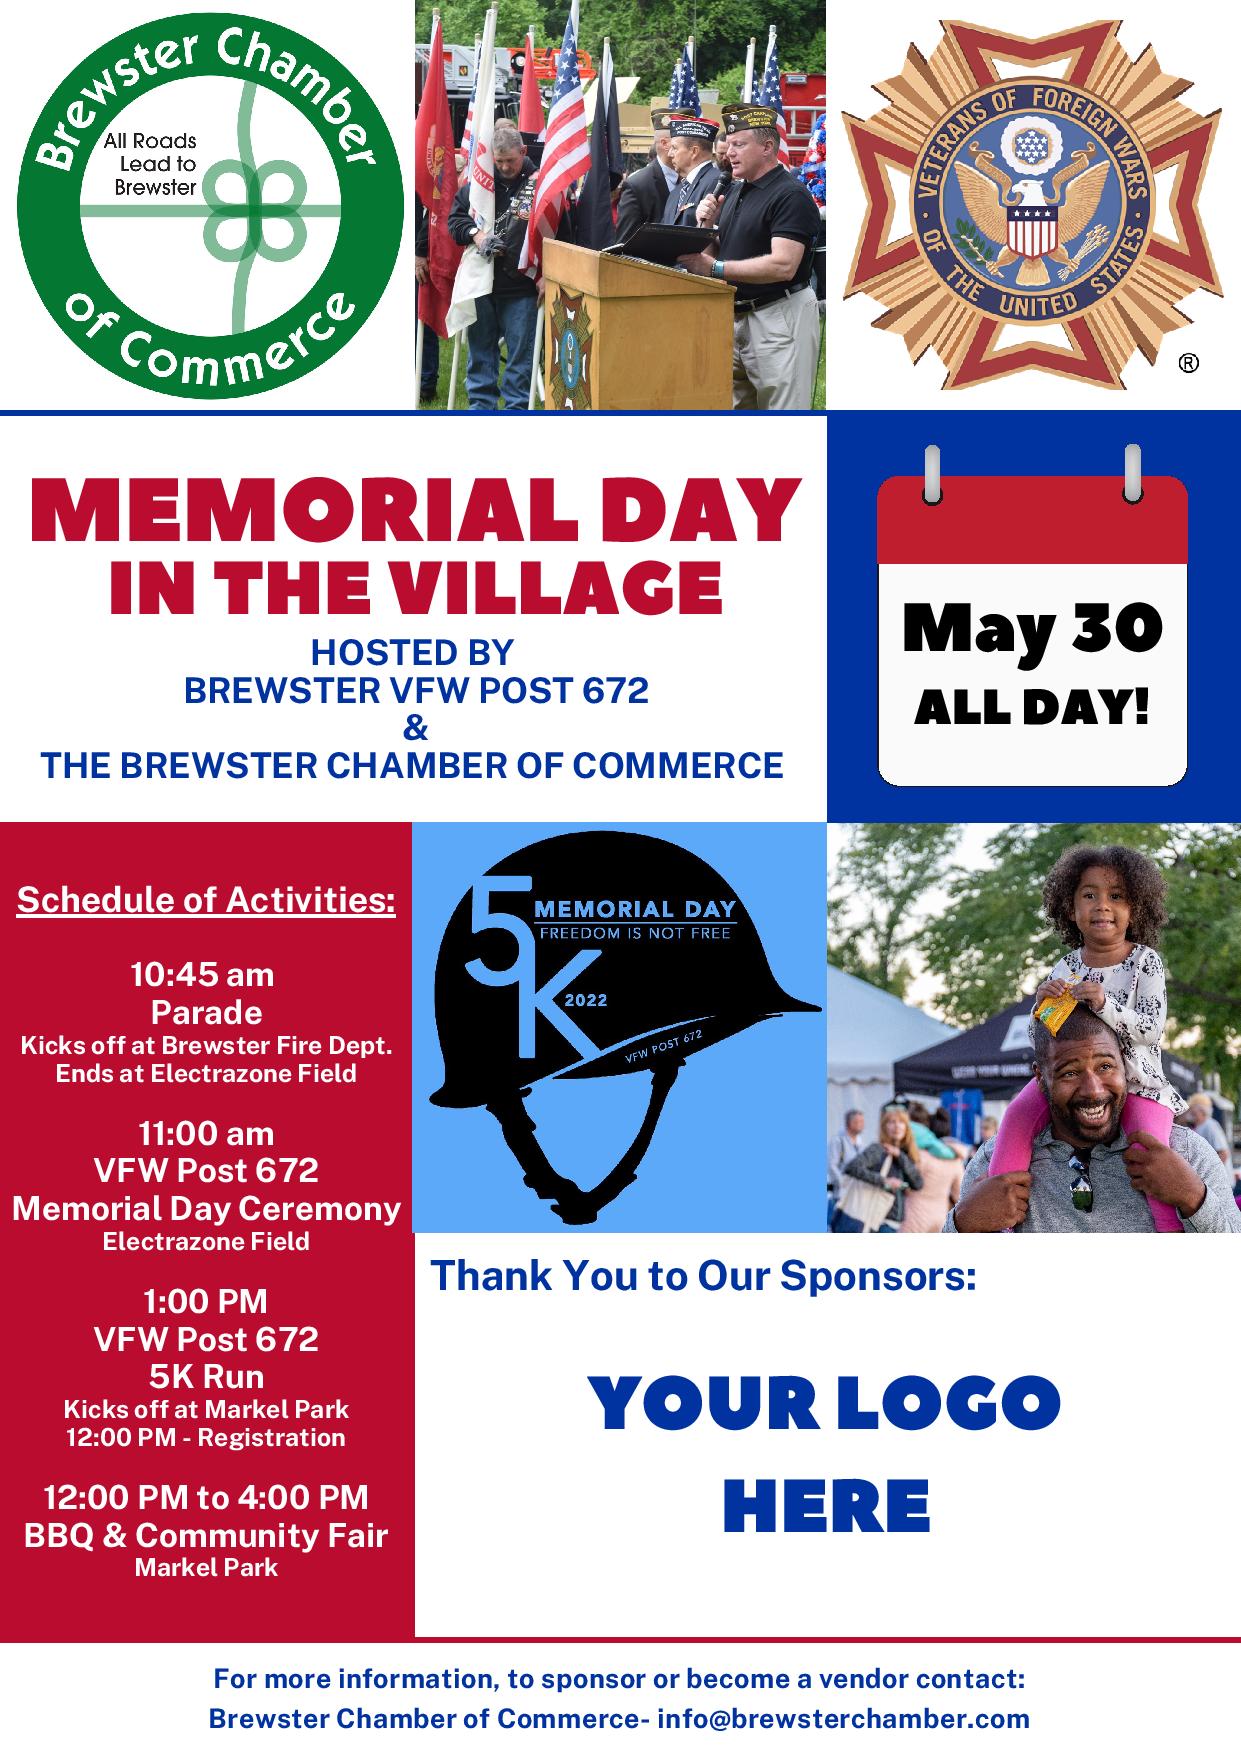 Memorial Day in the Village